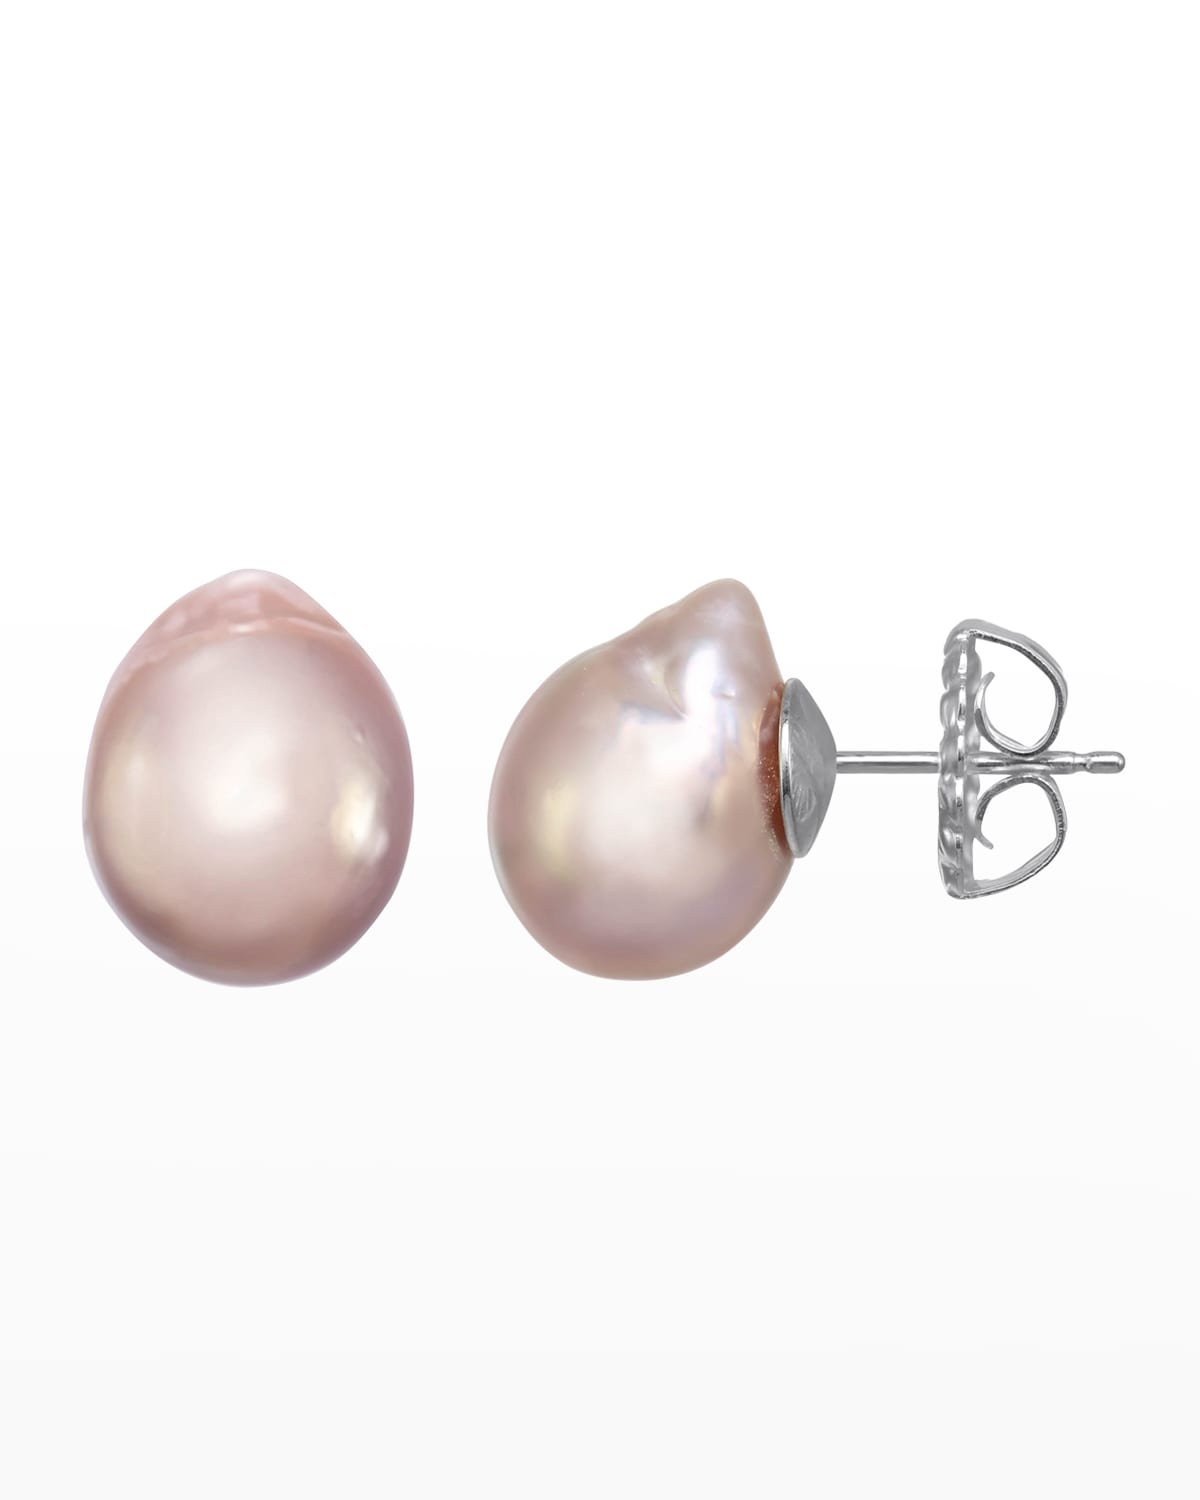 Small Pink Baroque Pearl Earrings on Sterling Silver Posts